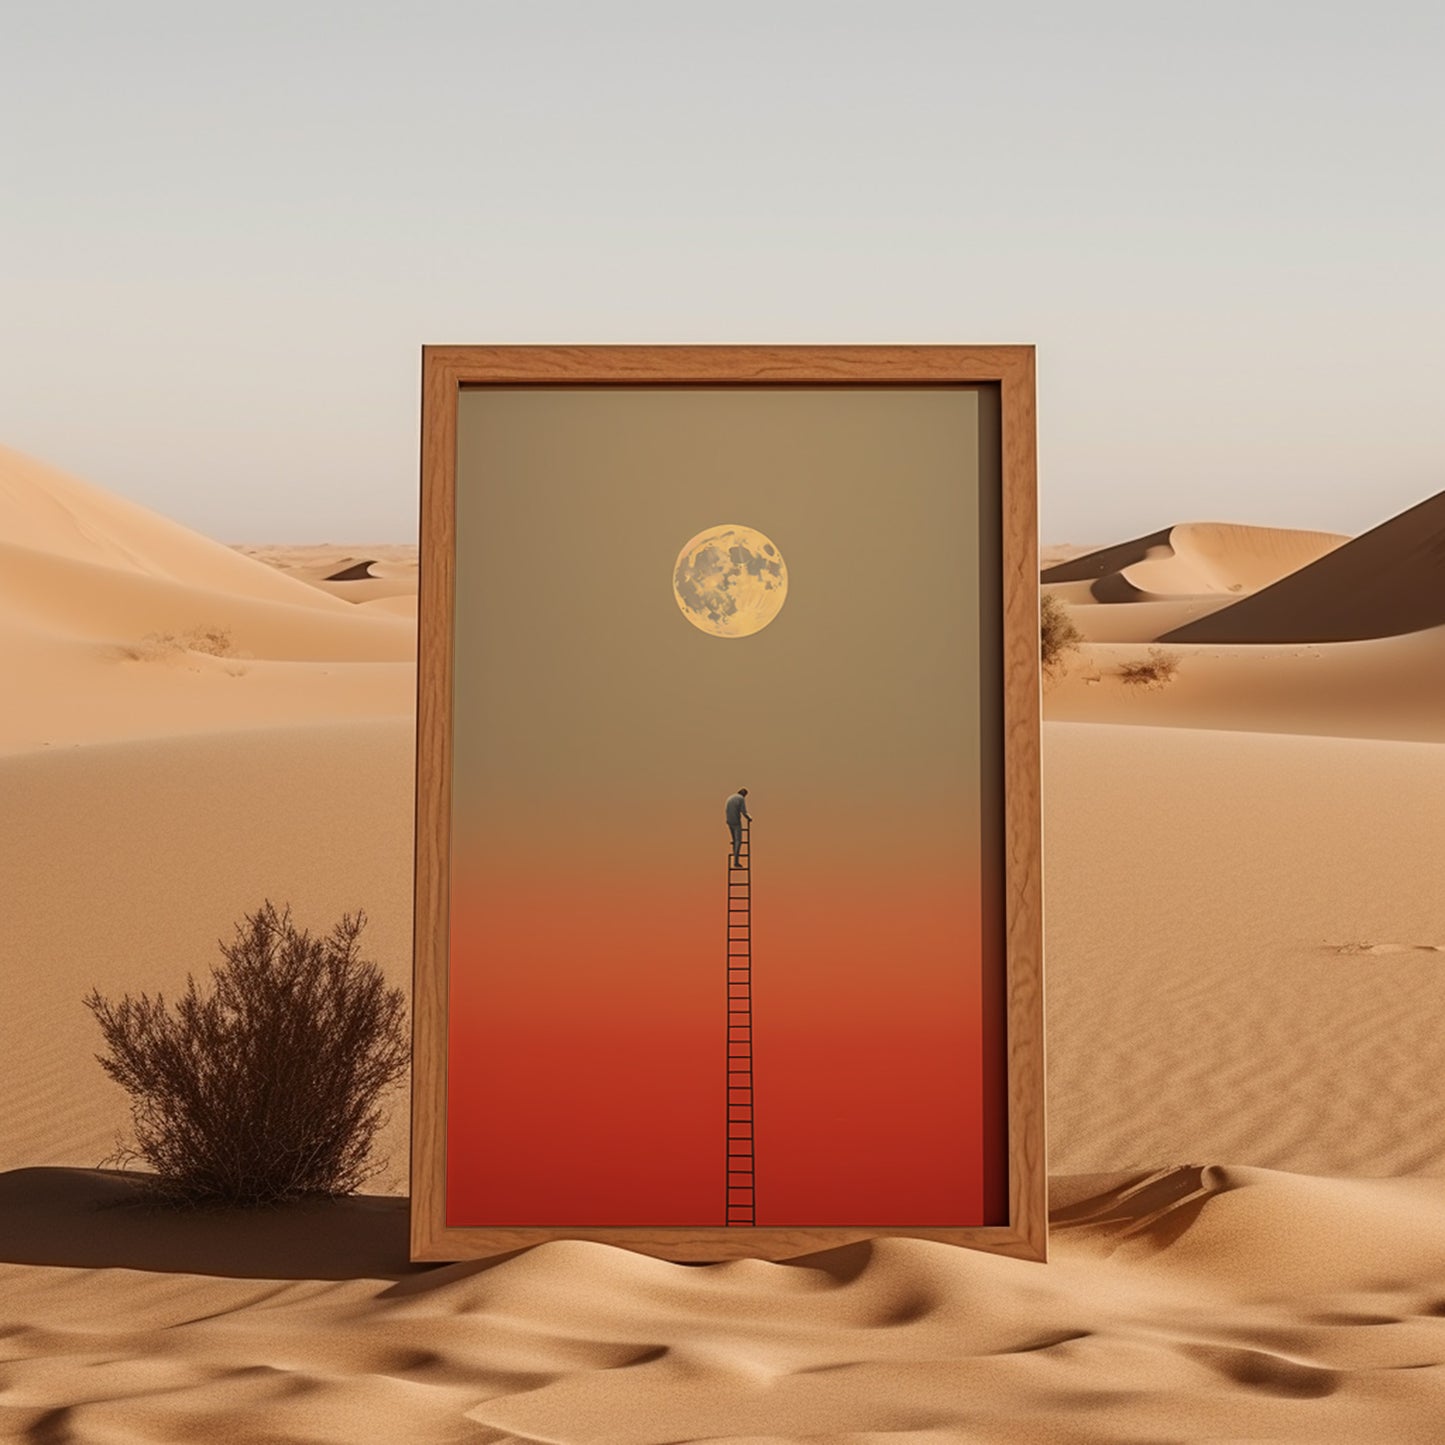 A surreal image of a framed doorway showing a ladder leading to the moon in a desert.